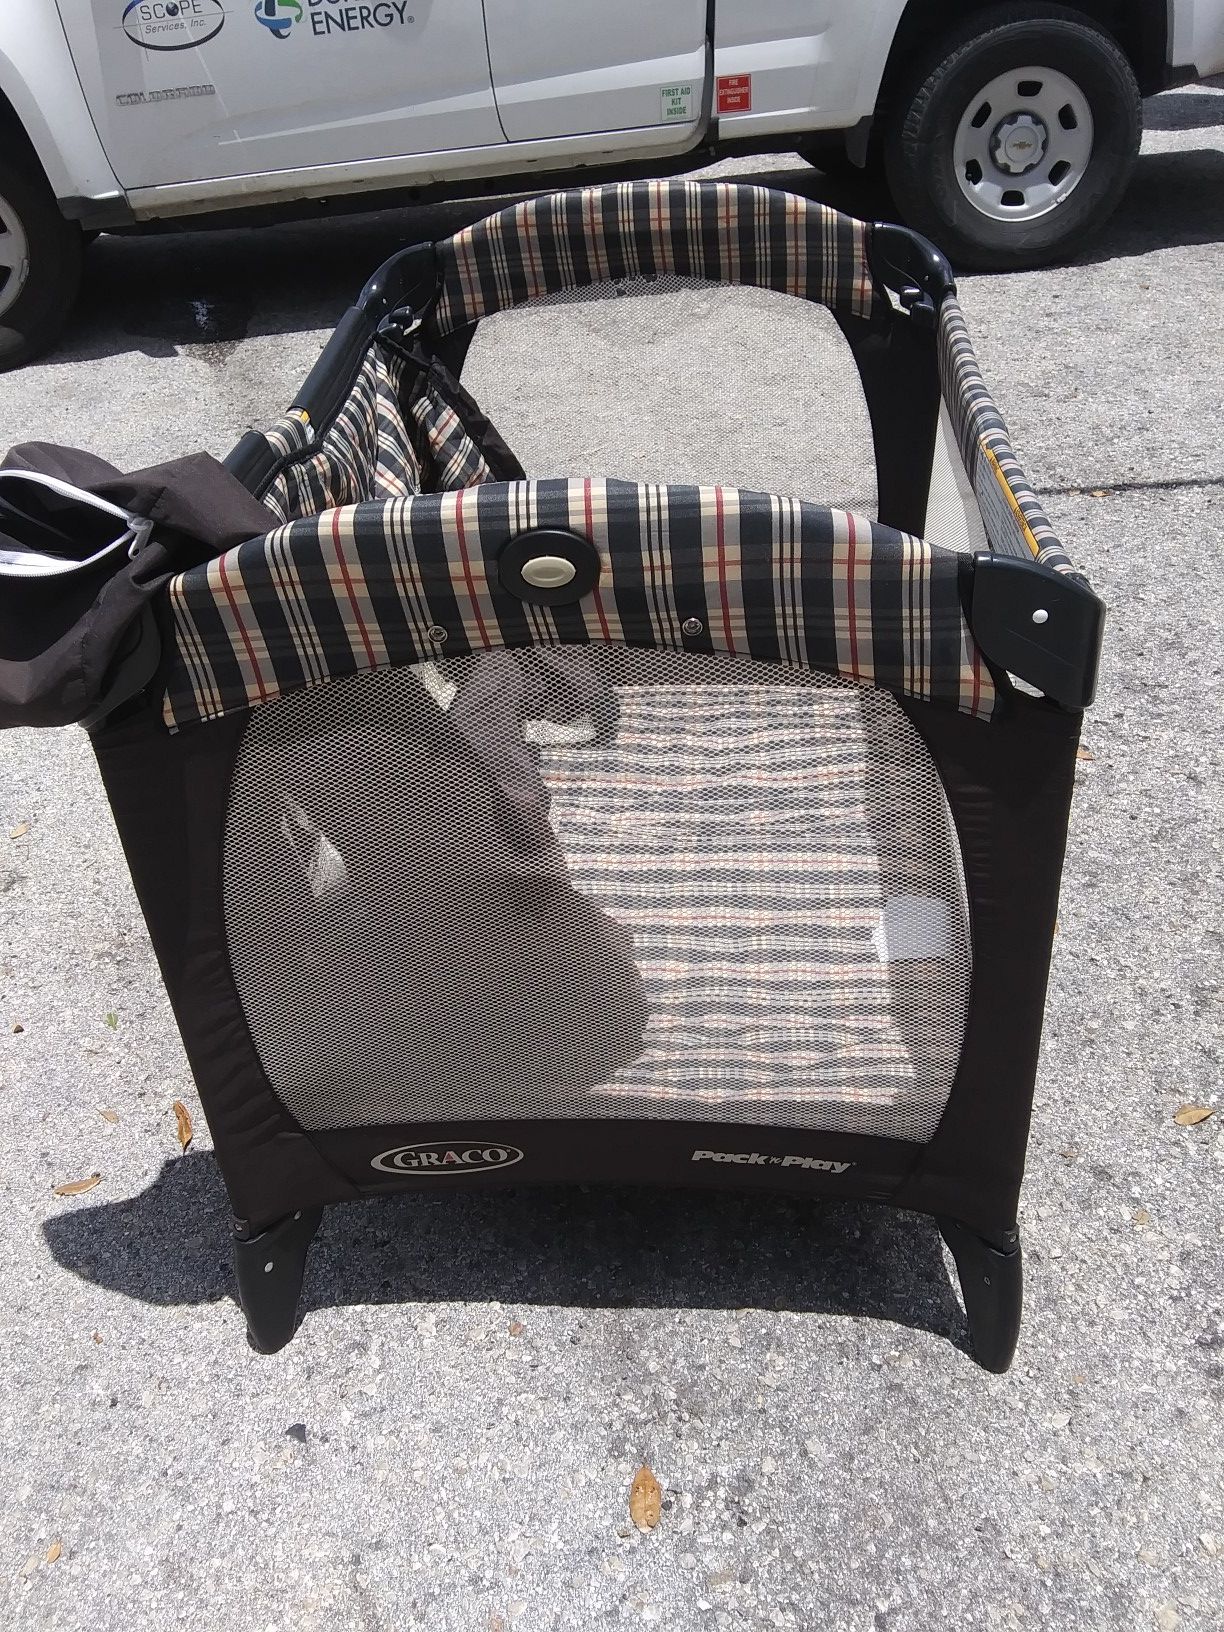 Graco pack and play with insert for infant bassinet